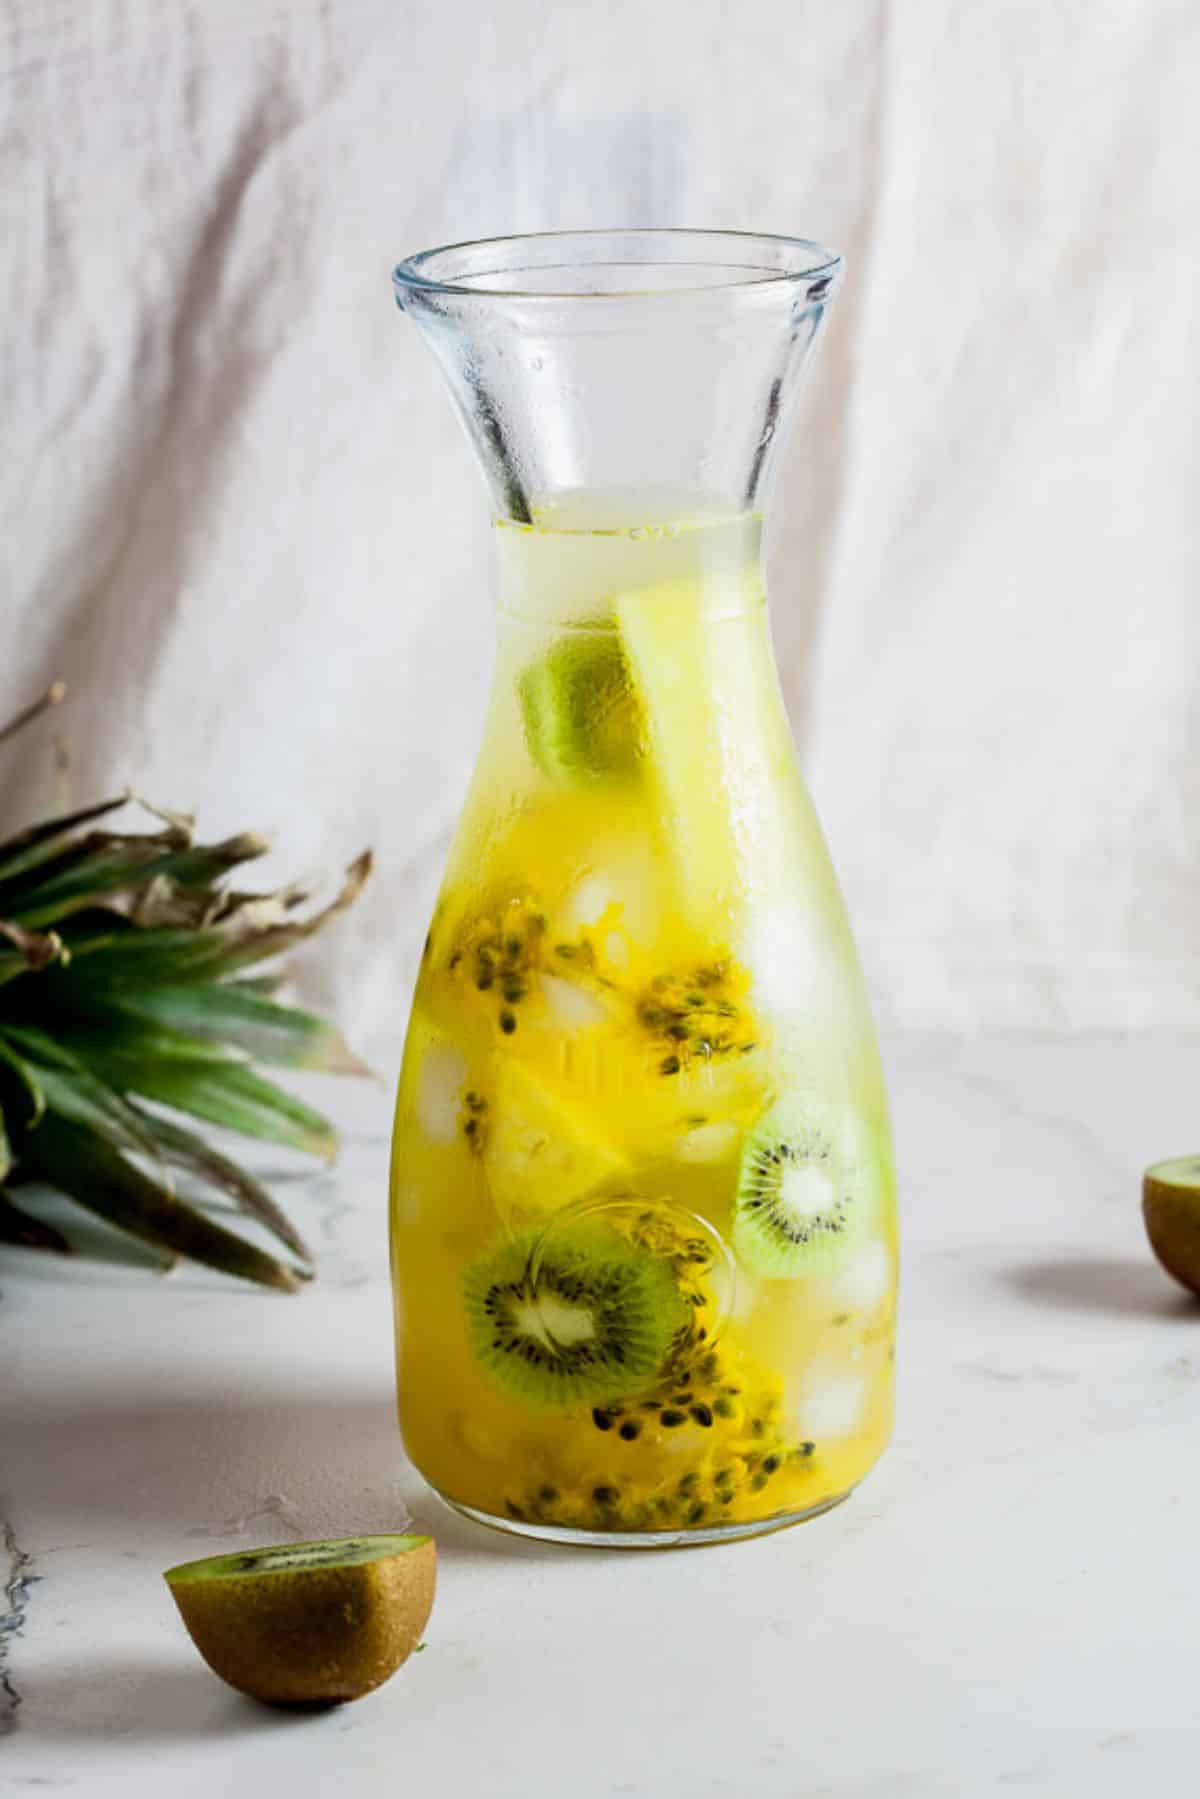 Refreshing pineapple, kiwi, and passion fruit flavored water in a glass jar.